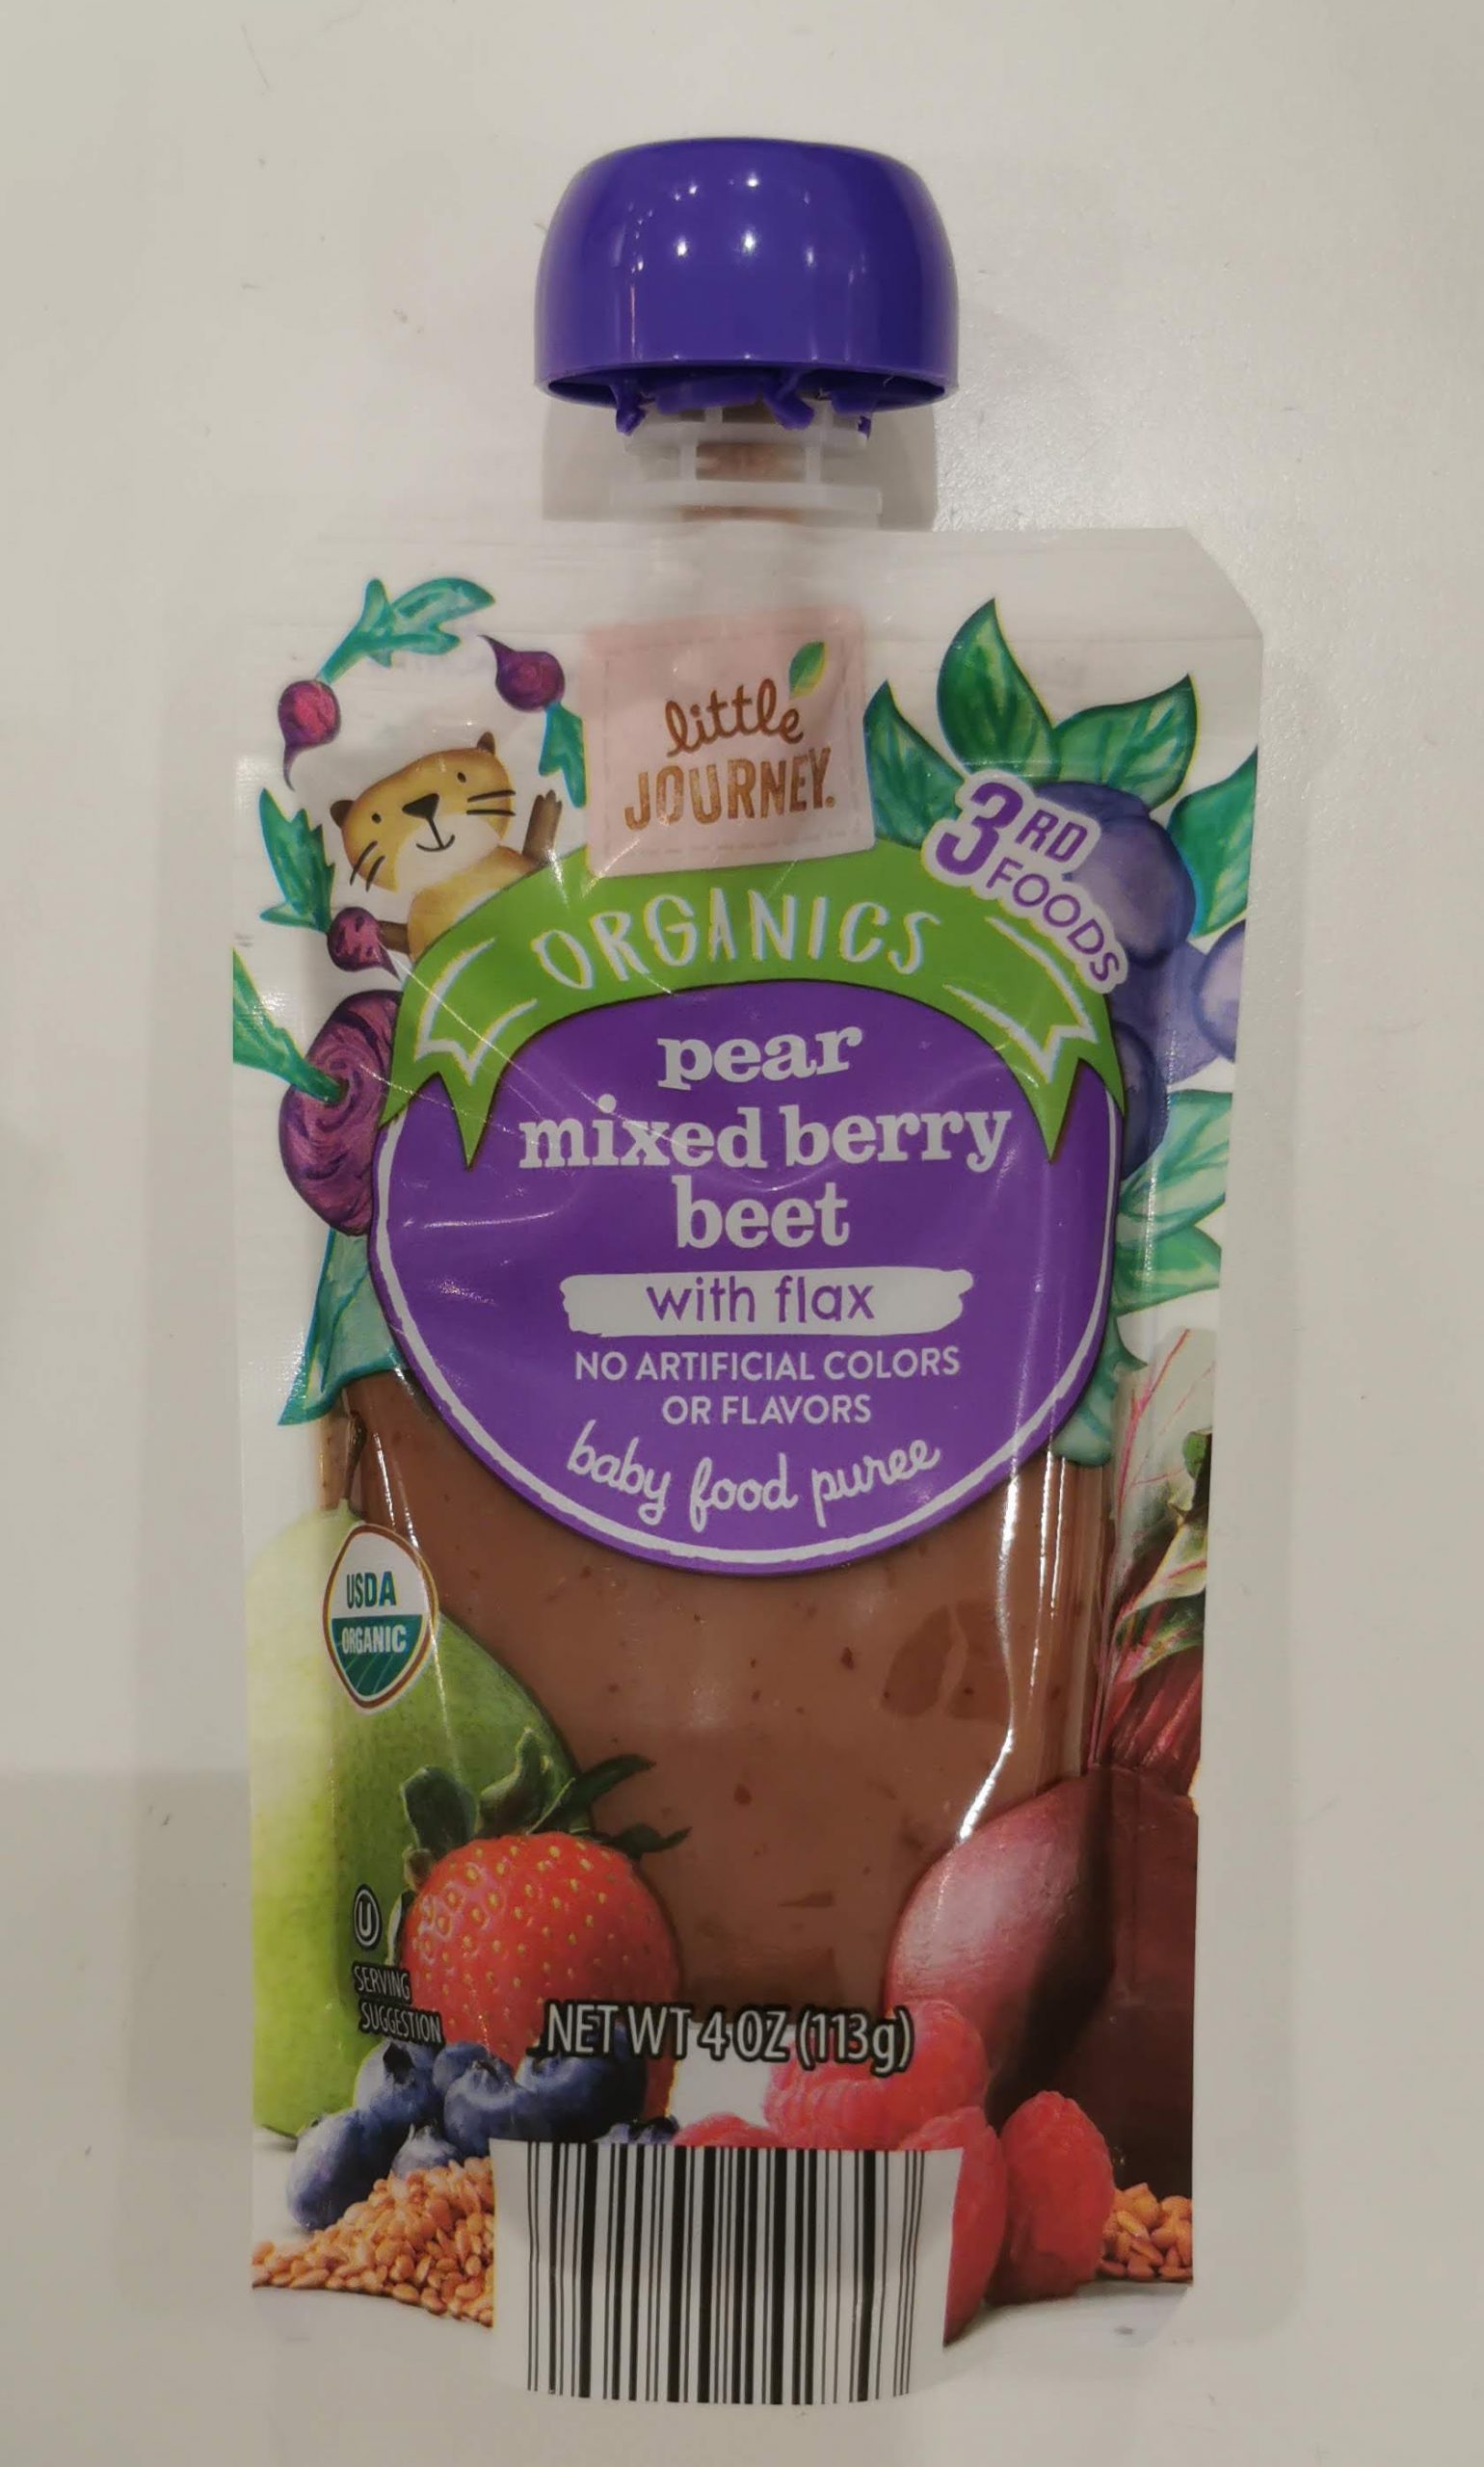 Read more about the article Little Journey Organics Pear Mixed Berry Beet with Flax Baby Food Puree (Aldi)